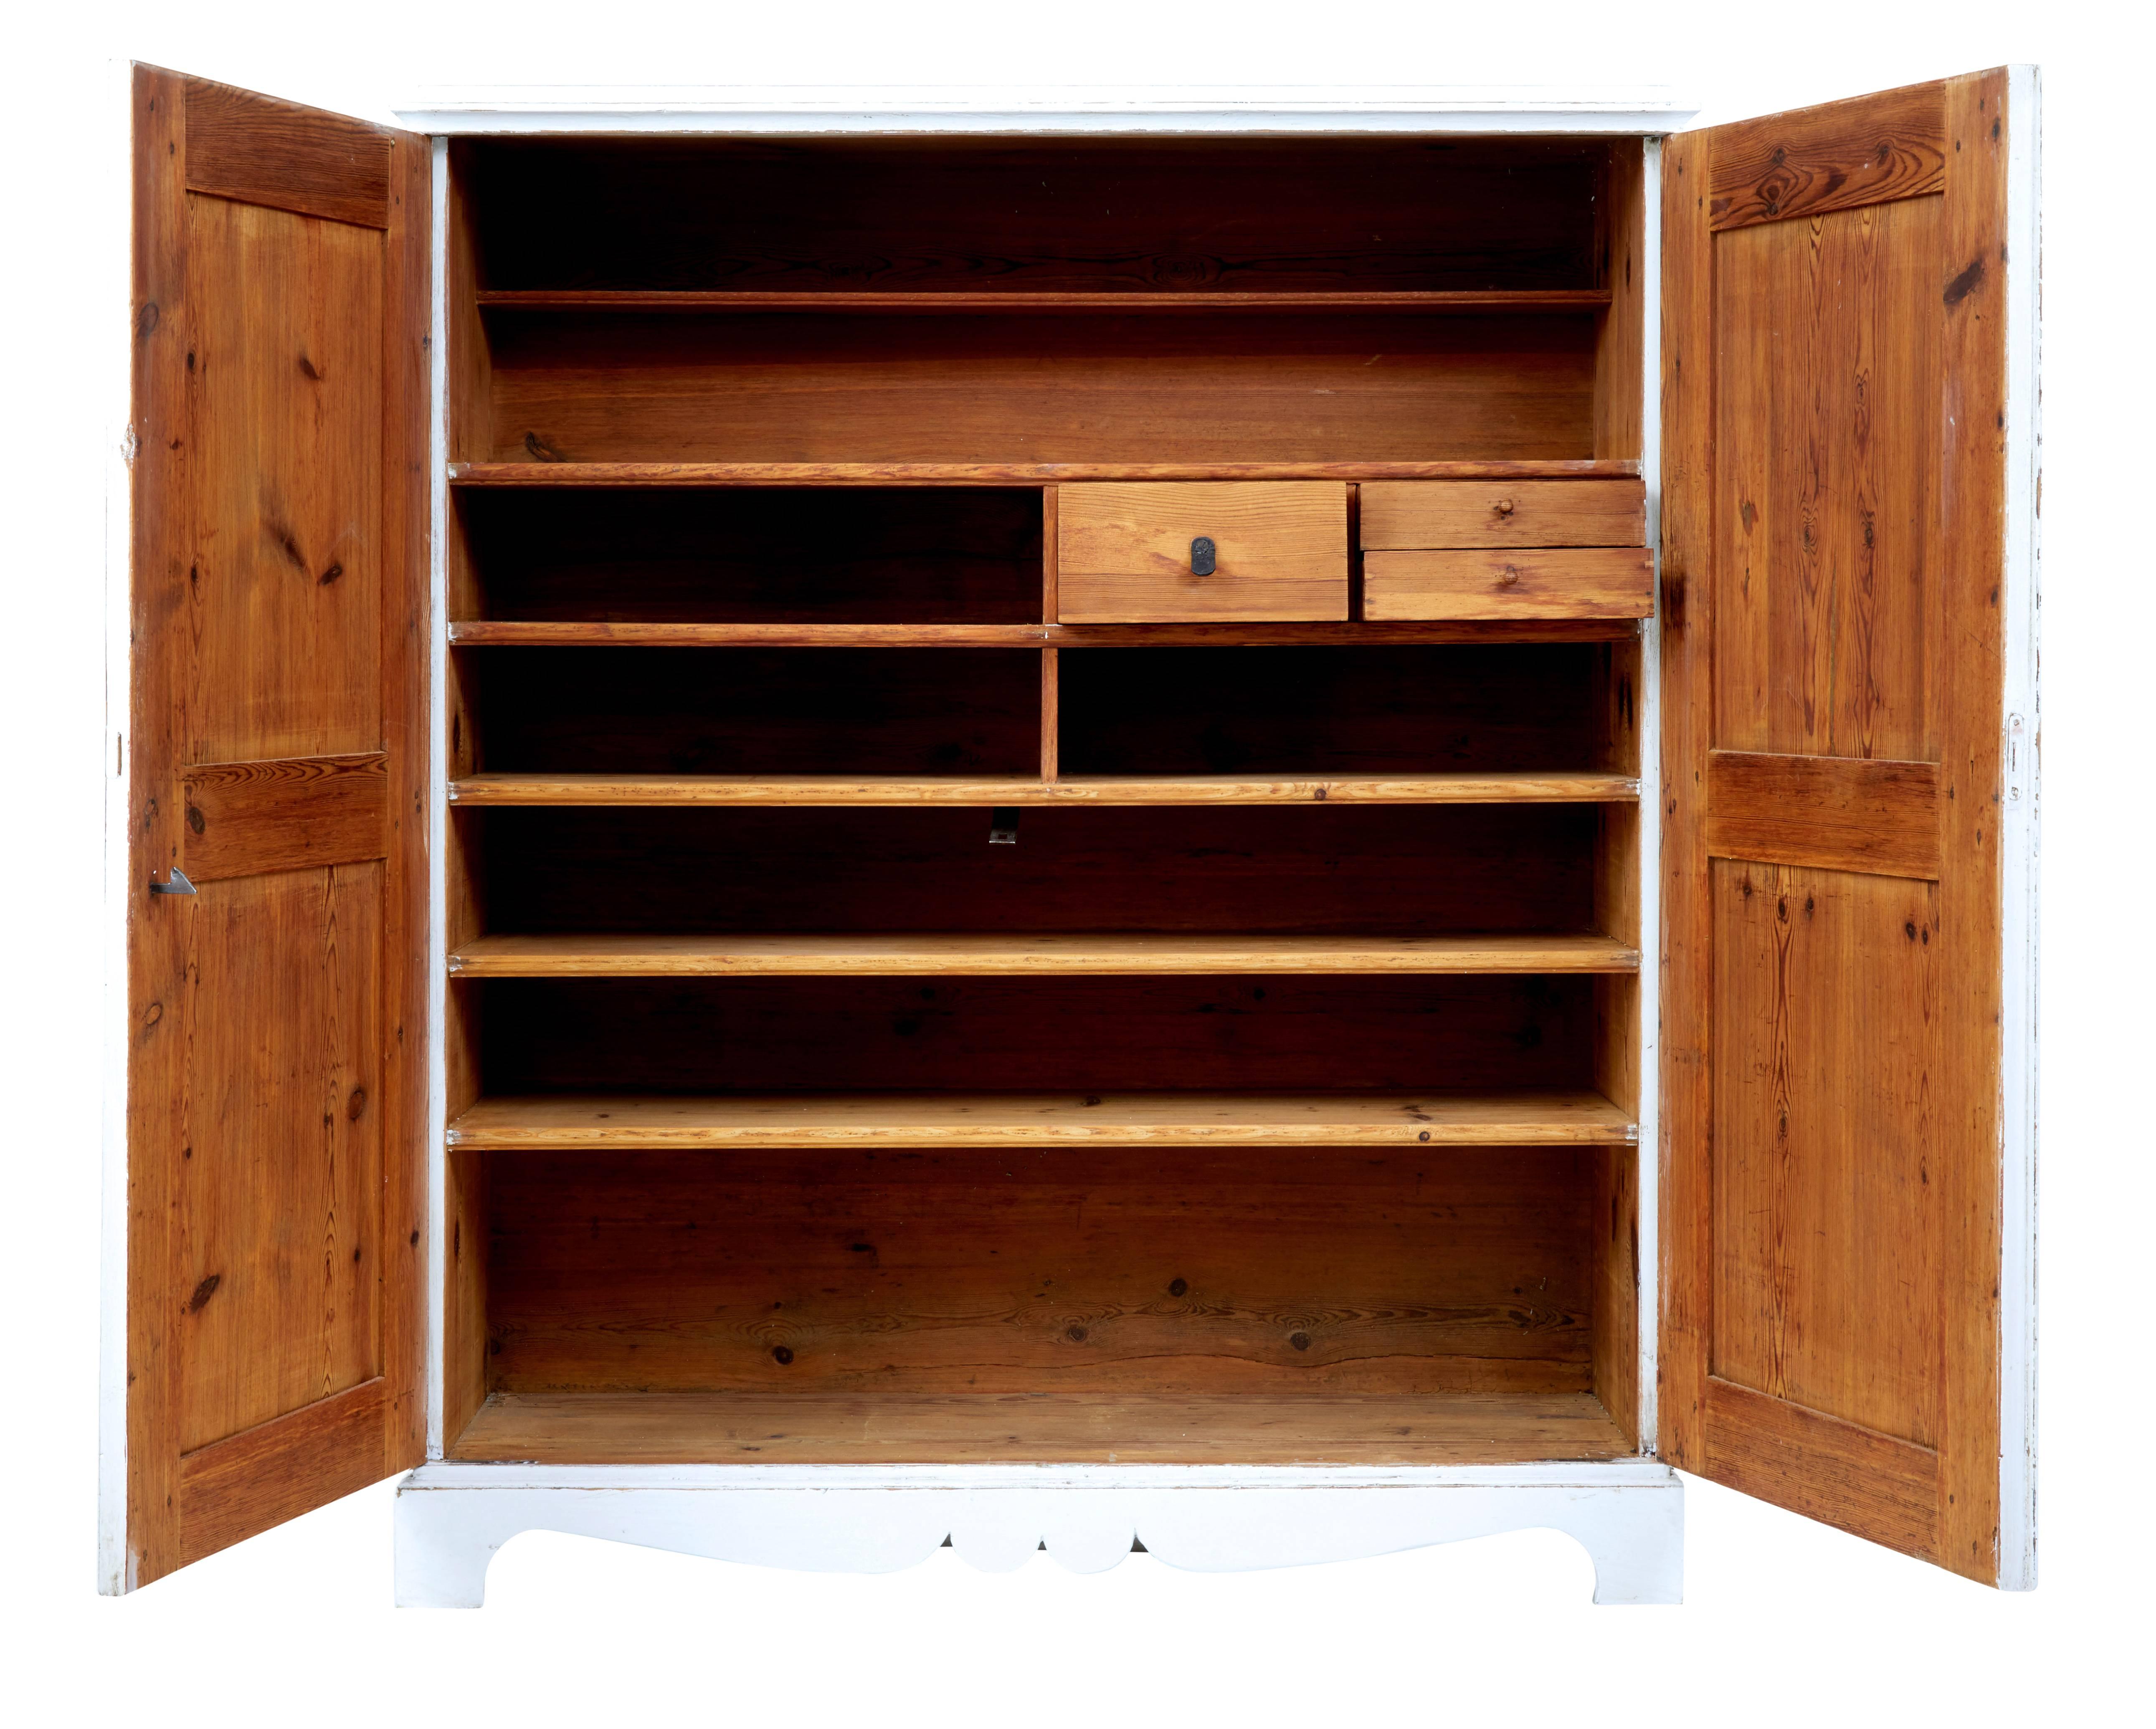 Swedish painted pine cupboard, circa 1870.

Double doors with recessed panels open to reveal a partially fitted interior.

Four shelves and four compartments, one compartment fitted with three shelves. Practical for use as a linen cupboard or in